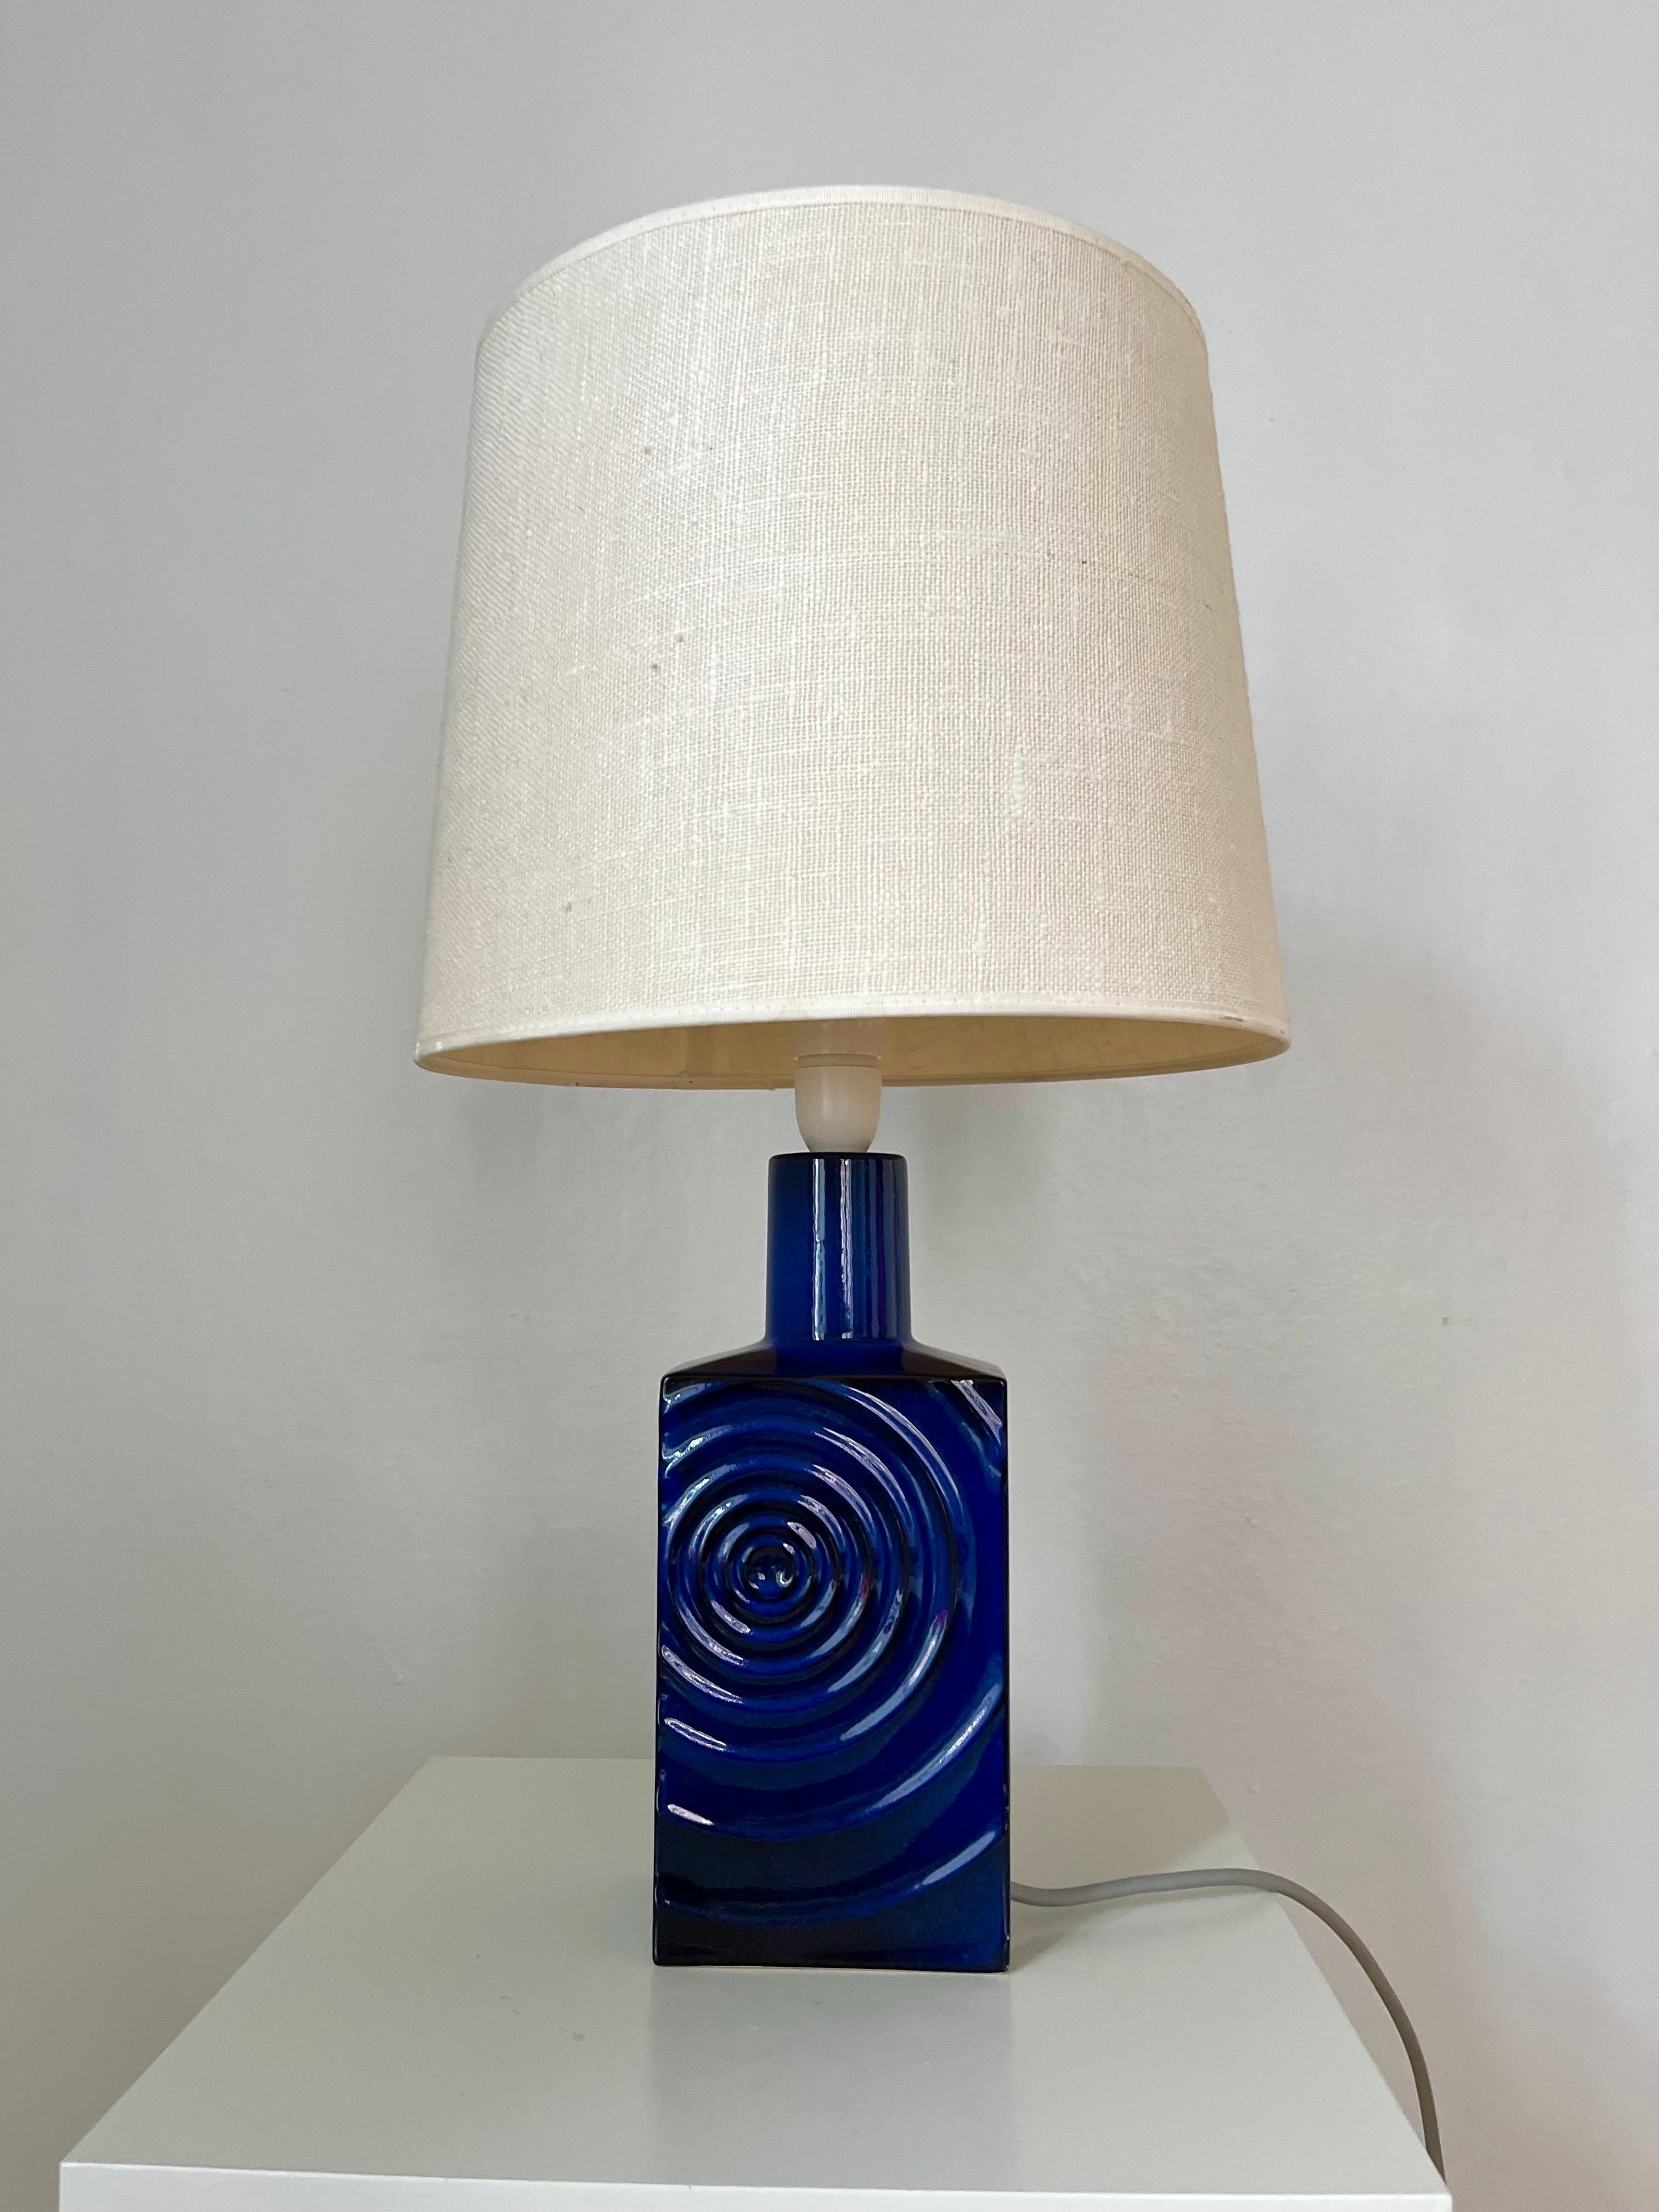 This mid-century modern table lamp 'Zyklon' was designed by Cari Zalloni for German manufacturer Steuler in the 1960s. 
The ceramic table lamp has a deep blue glazing fading into black, a raised circular pattern on the front and backside. 
The